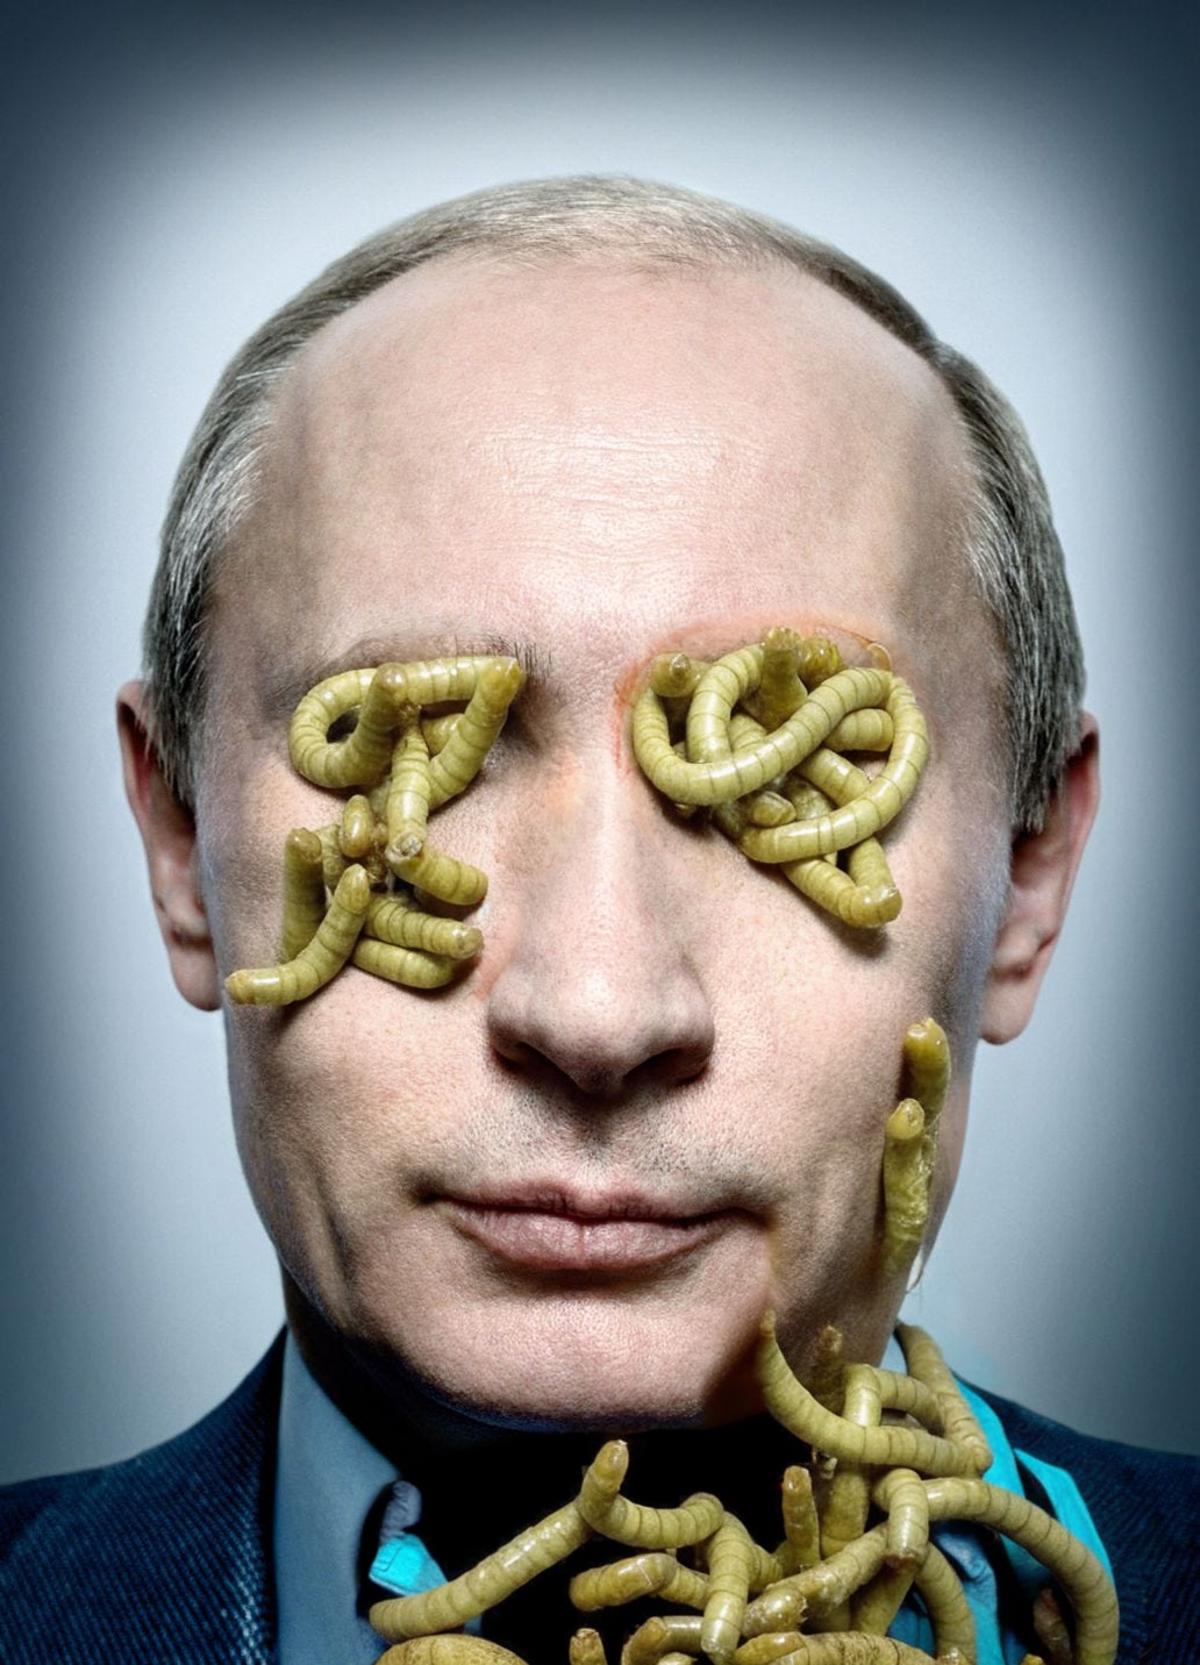 A man with bugs in his eyes and mouth, with the Russian President Vladimir Putin as the subject.